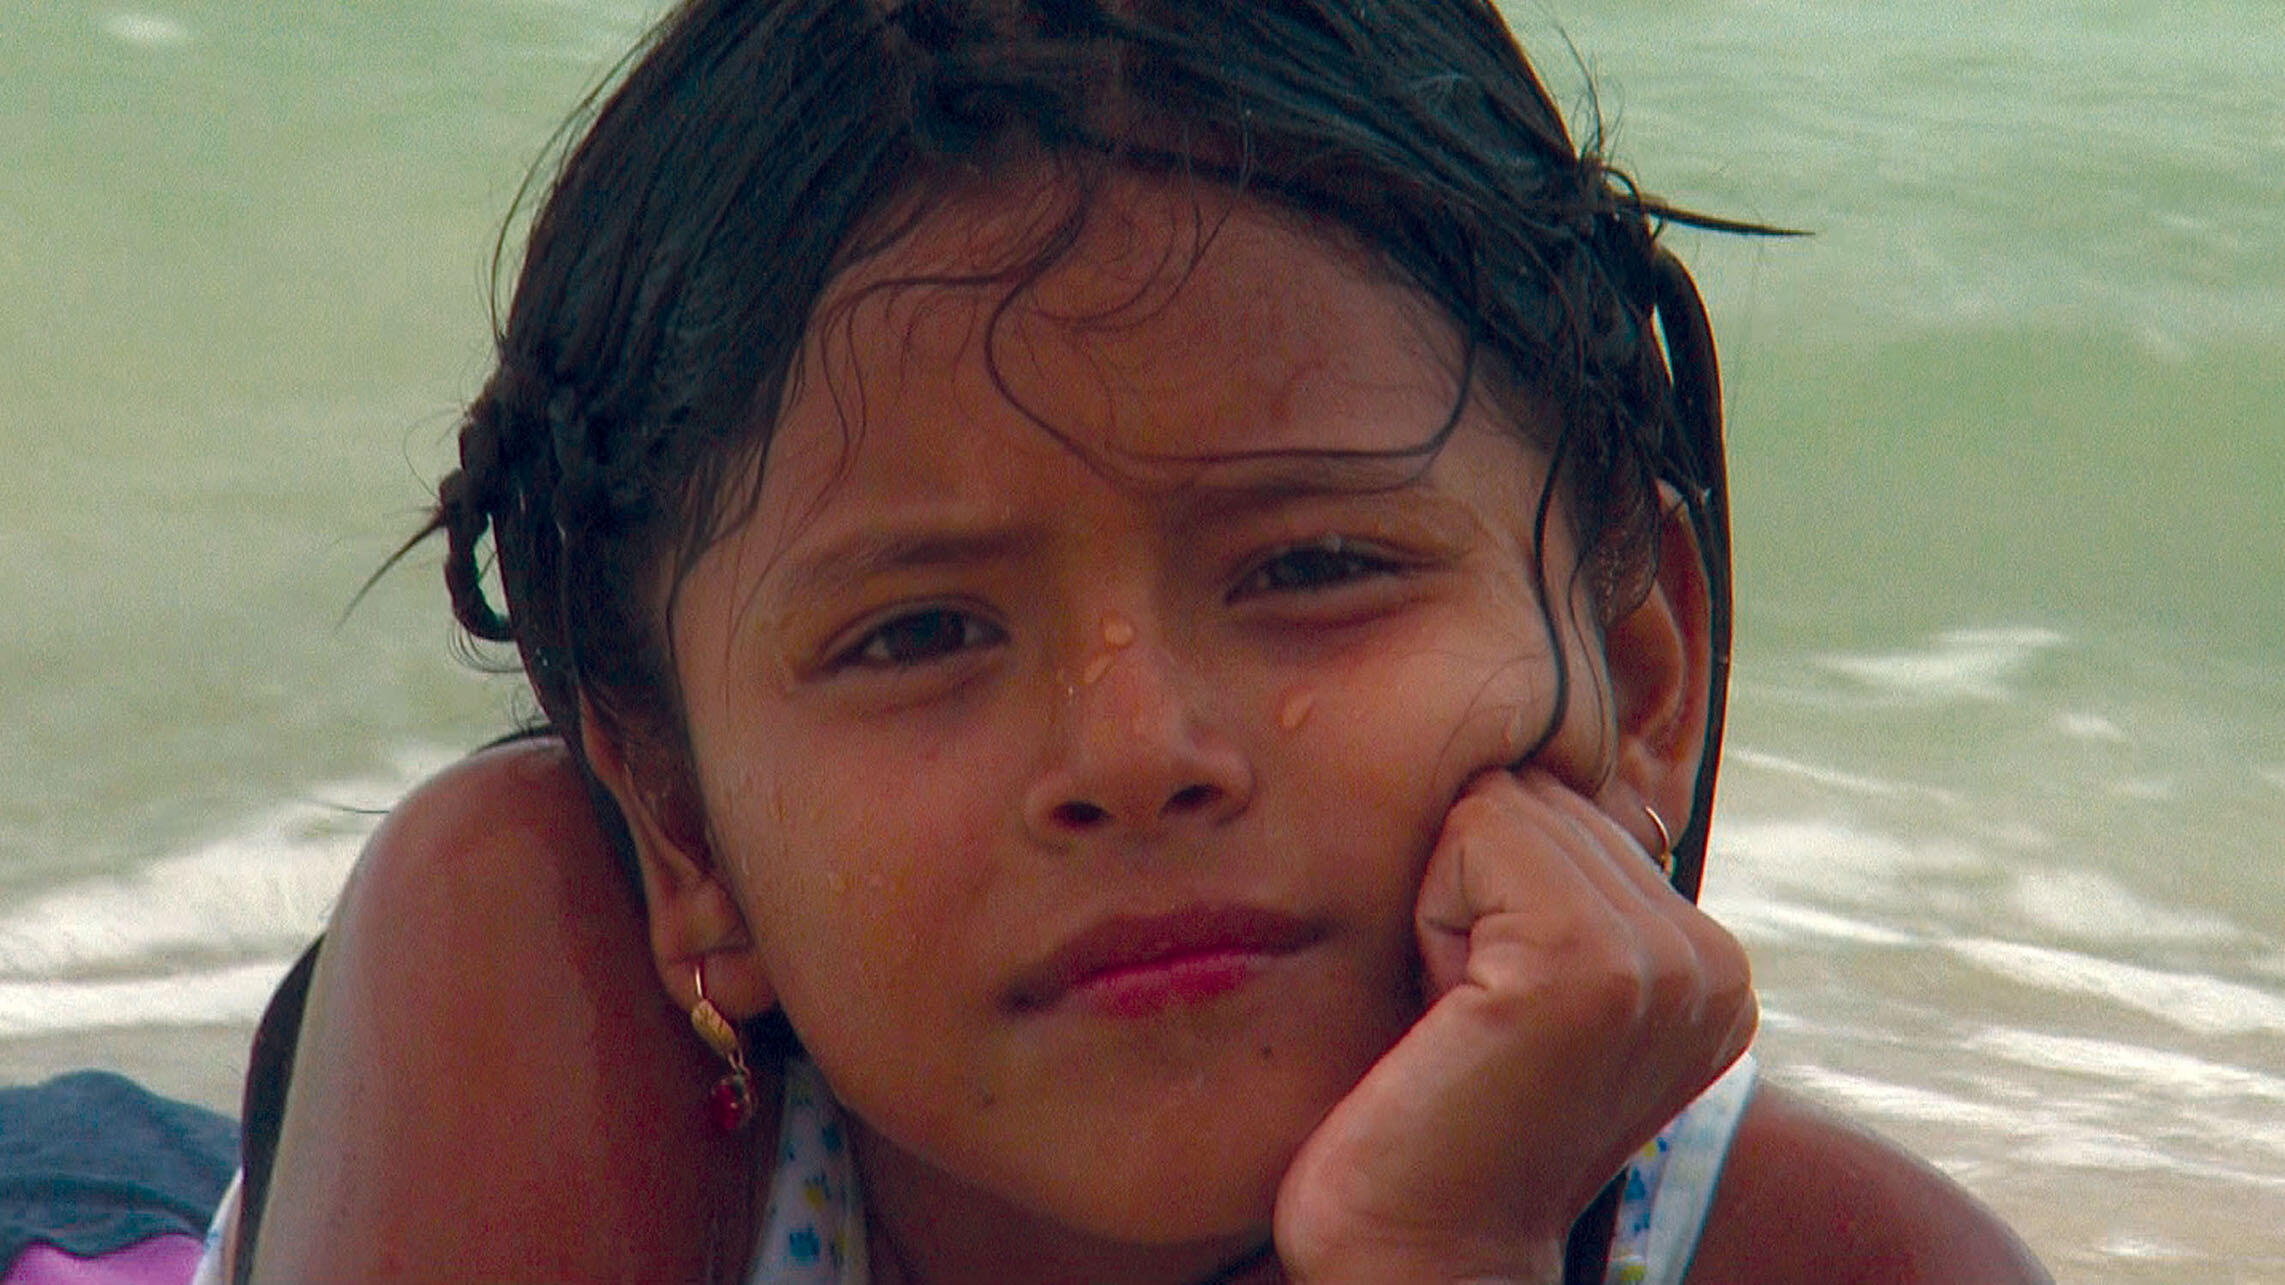 This still from “Those Who Remain” features Evelyn, a young girl from the Yucatán, whose father is in the United States. (Photo courtesy of Fundación BBVA Bancomer.)